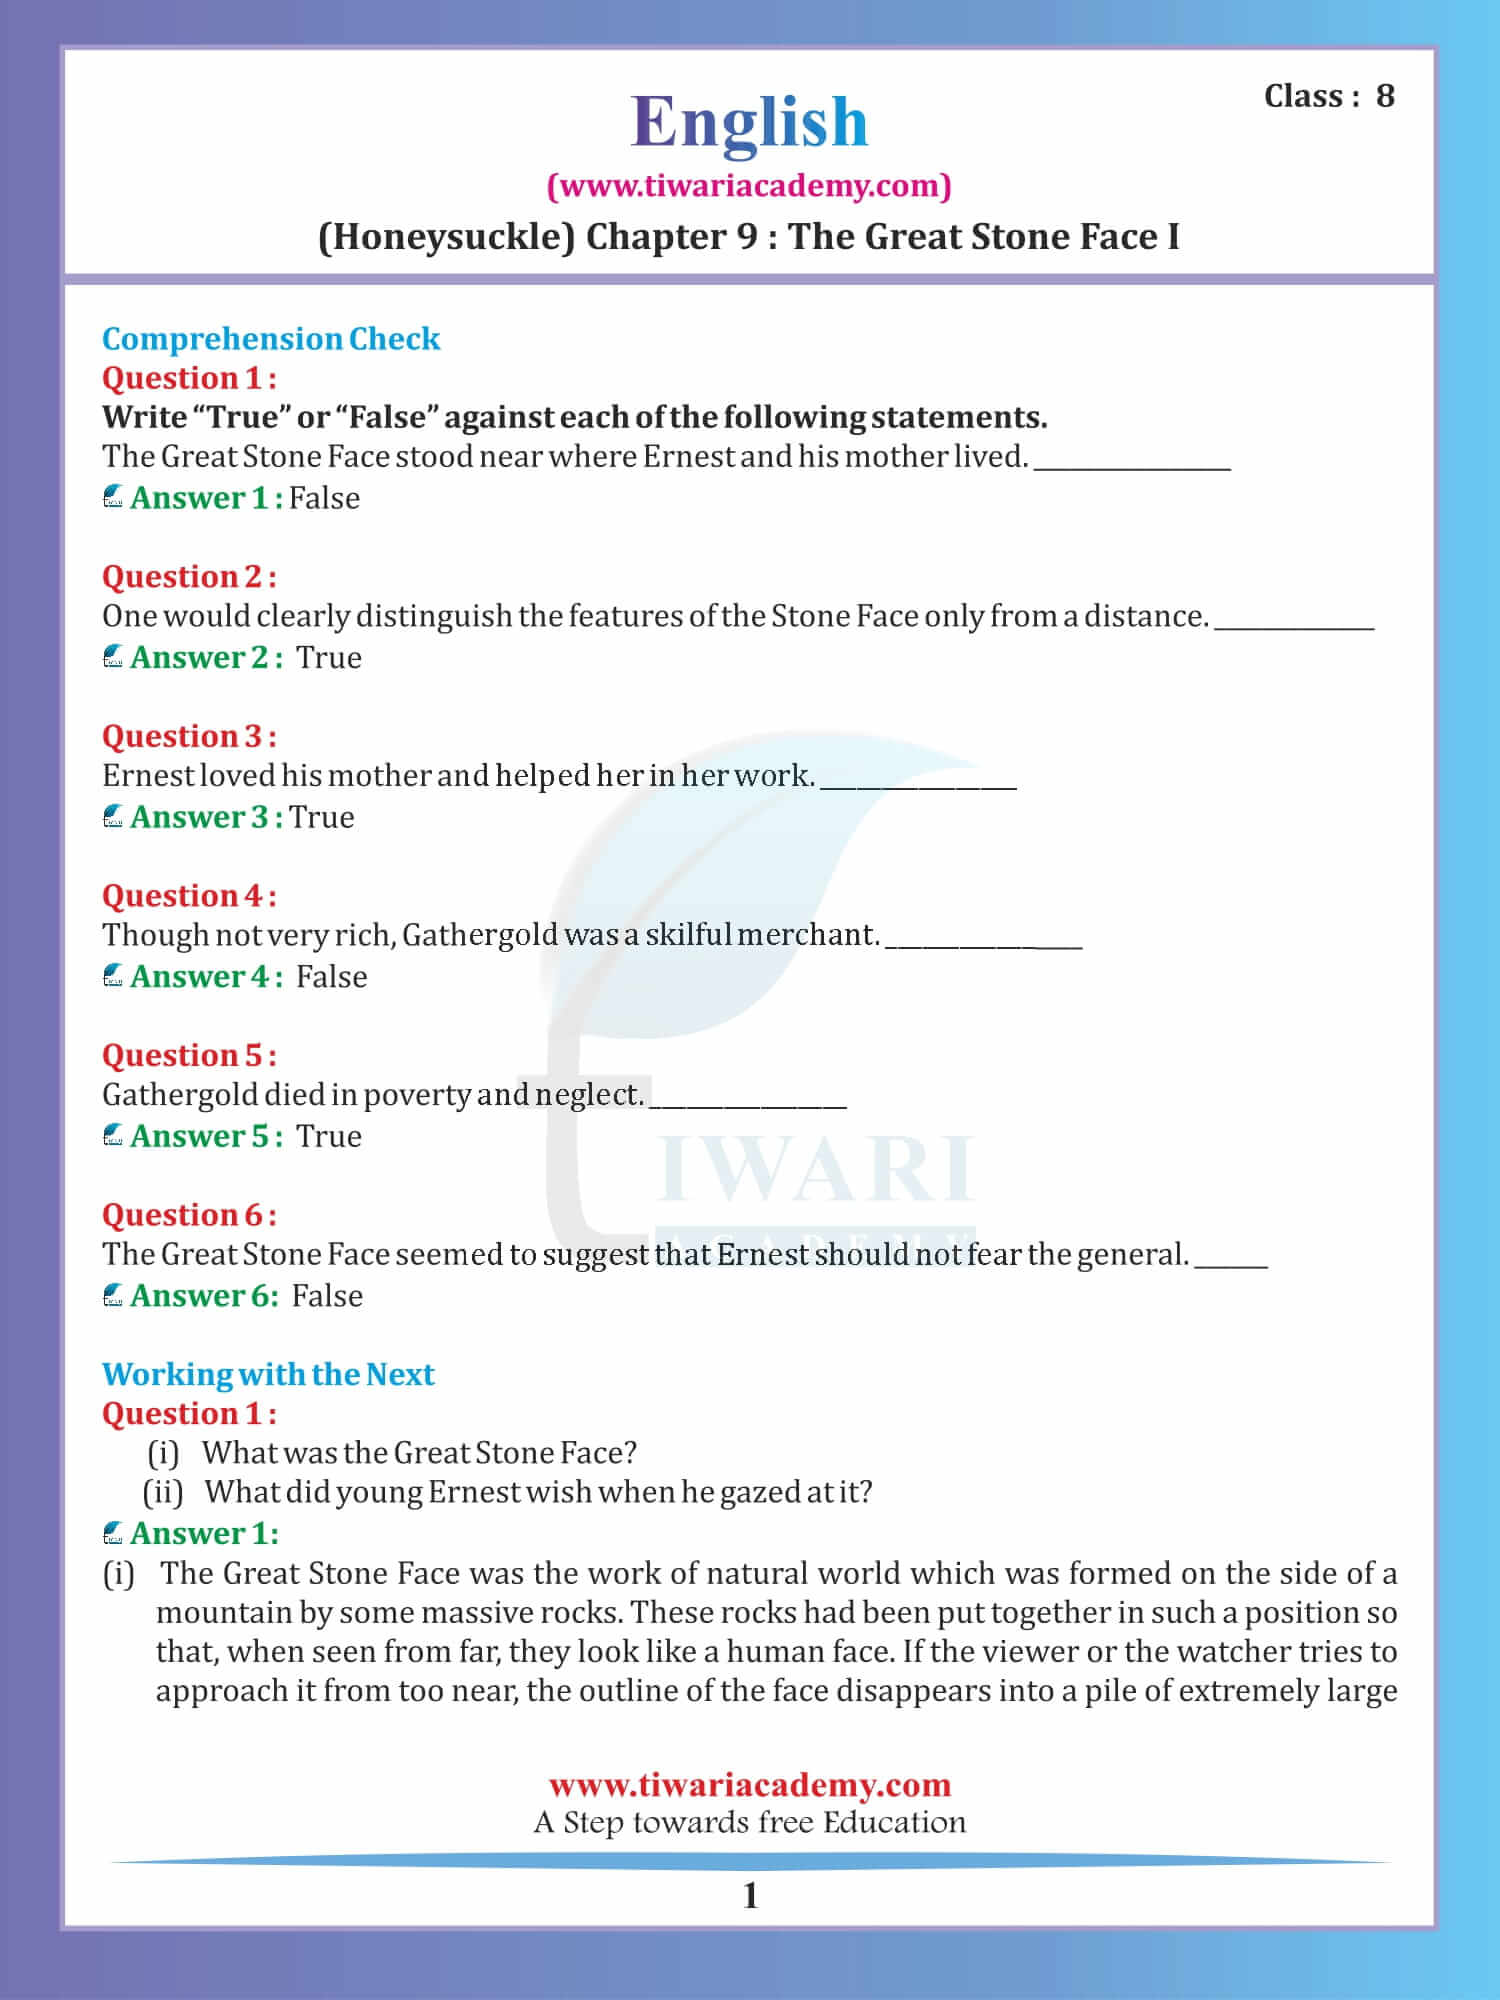 Class 8 English Honeydew Chapter 9 The Great Stone Face - I